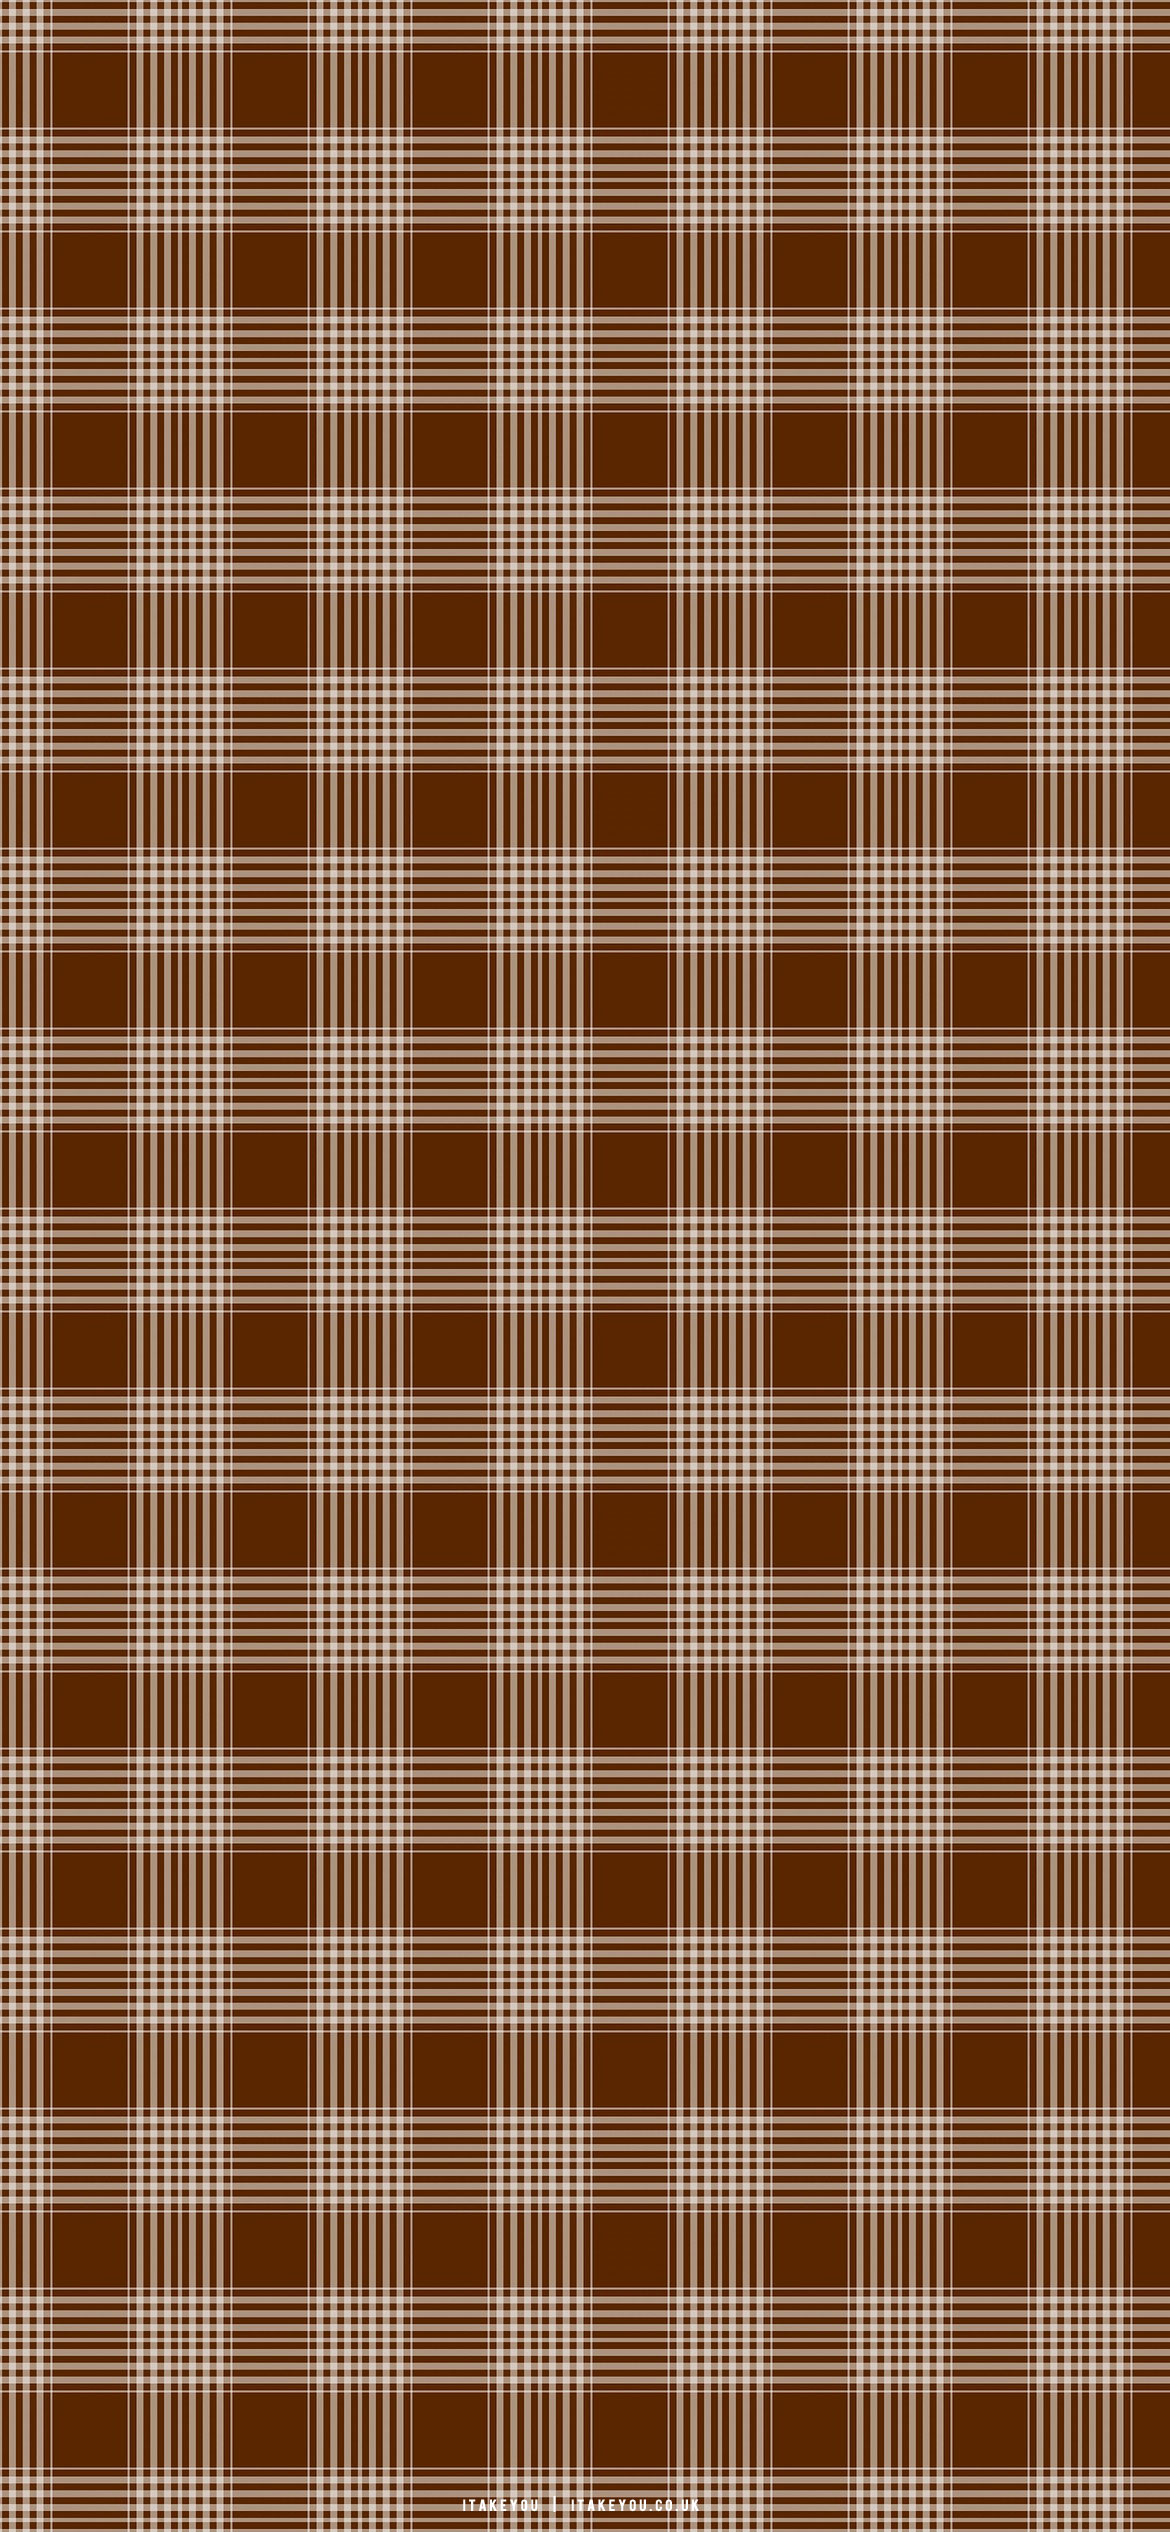 Minimalist Brown Wallpaper iPhone Ideas for iPhone, Brown Plaid I Take You. Wedding Readings. Wedding Ideas